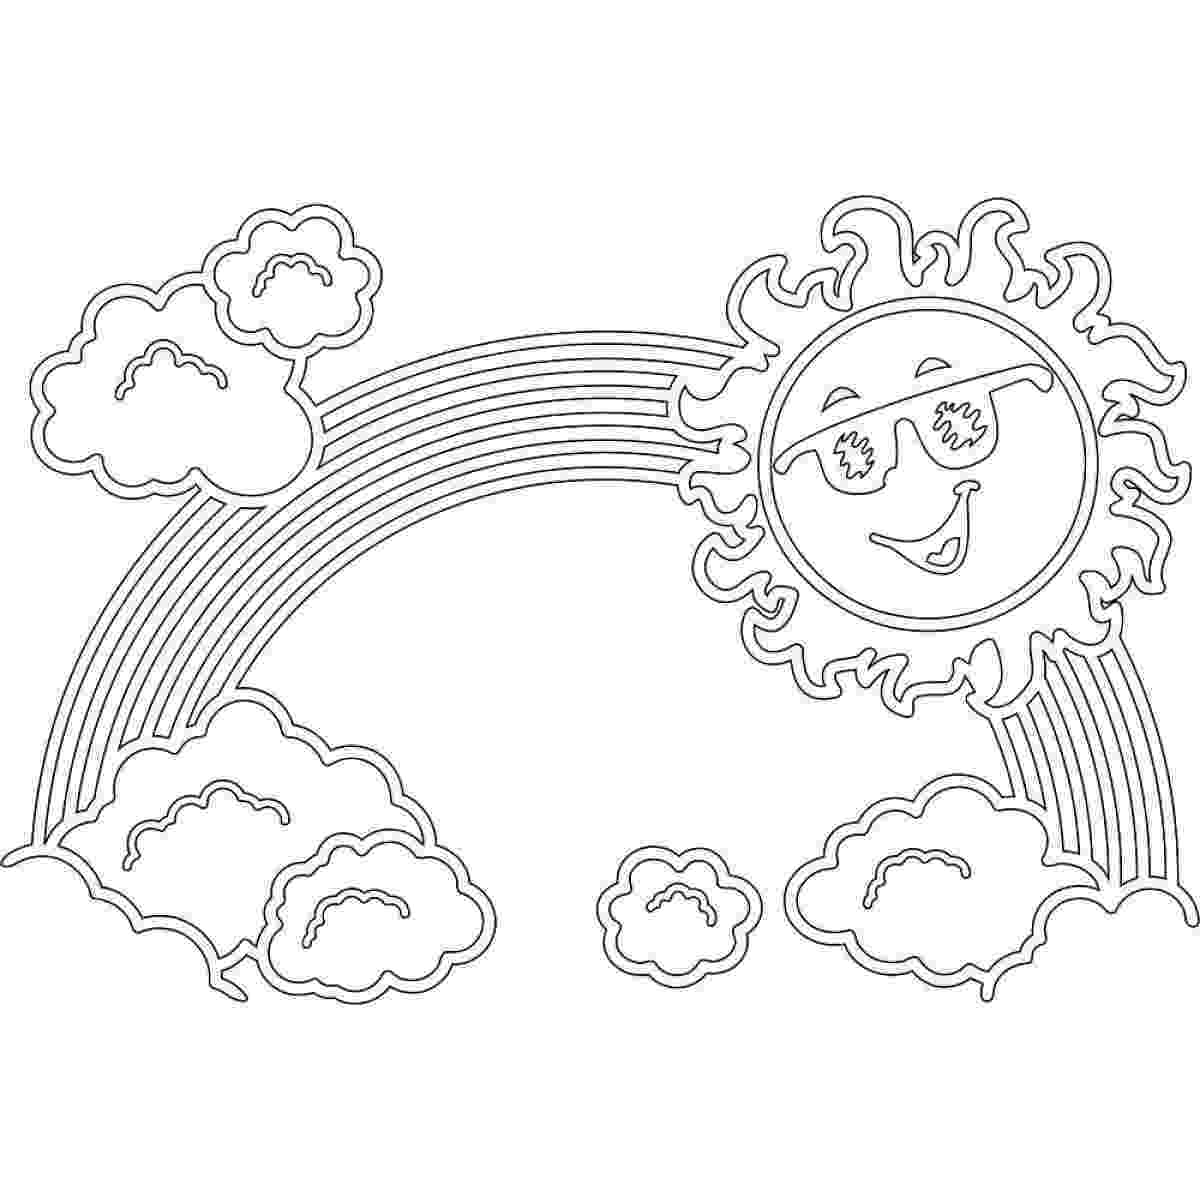 coloring pages rainbow cute rainbow patterns with clouds free template you can coloring rainbow pages 